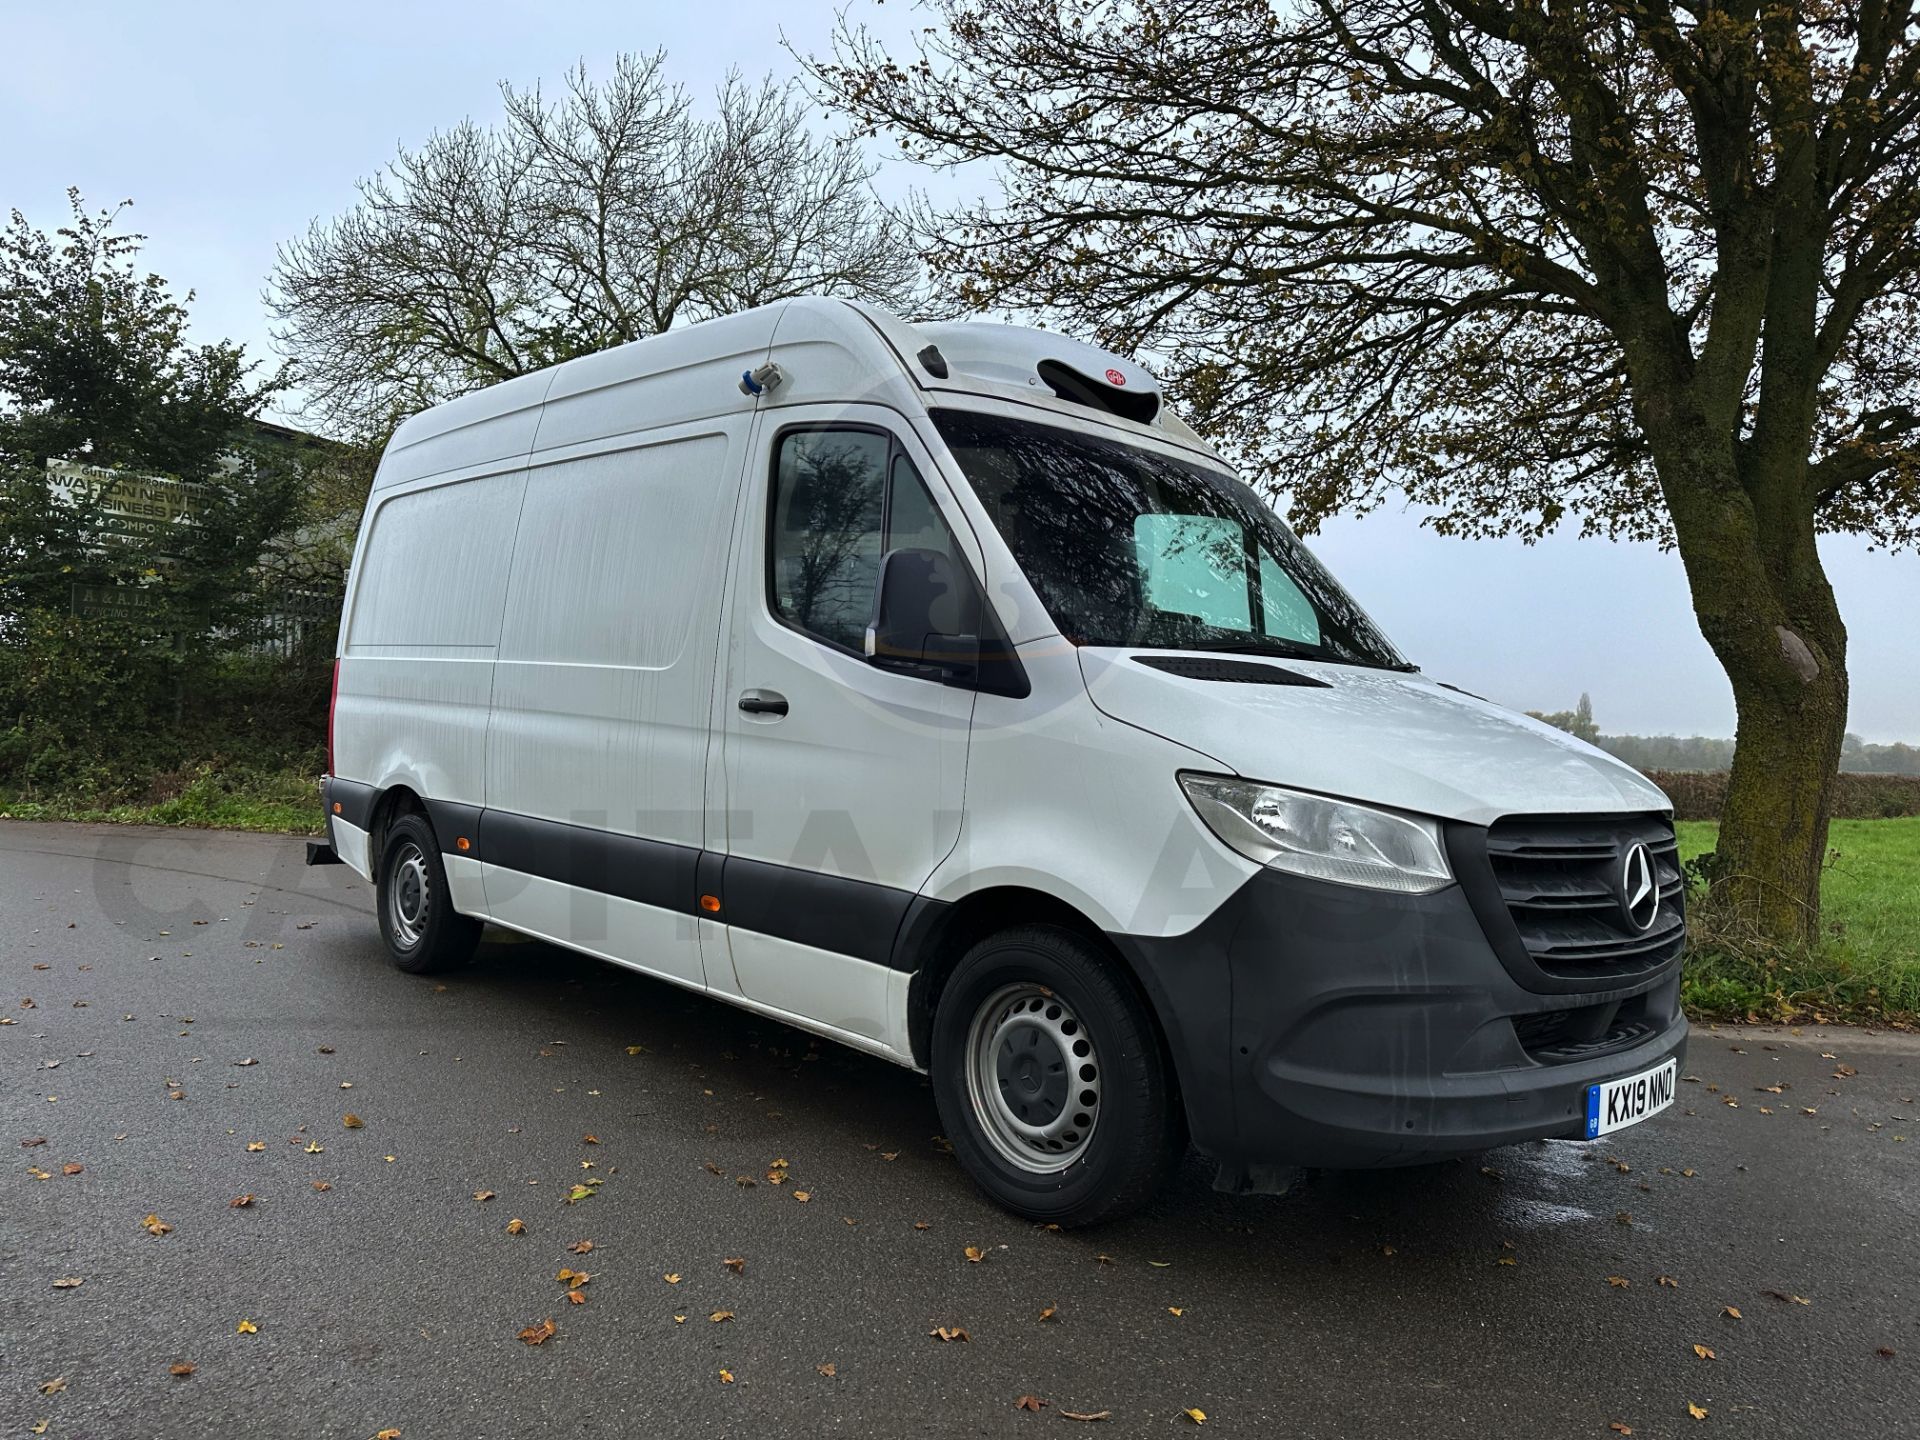 MERCEDES-BENZ SPRINTER 314 CDI *MWB - REFRIGERATED VAN* (2019 - FACELIFT MODEL) *OVERNIGHT STANDBY* - Image 3 of 45